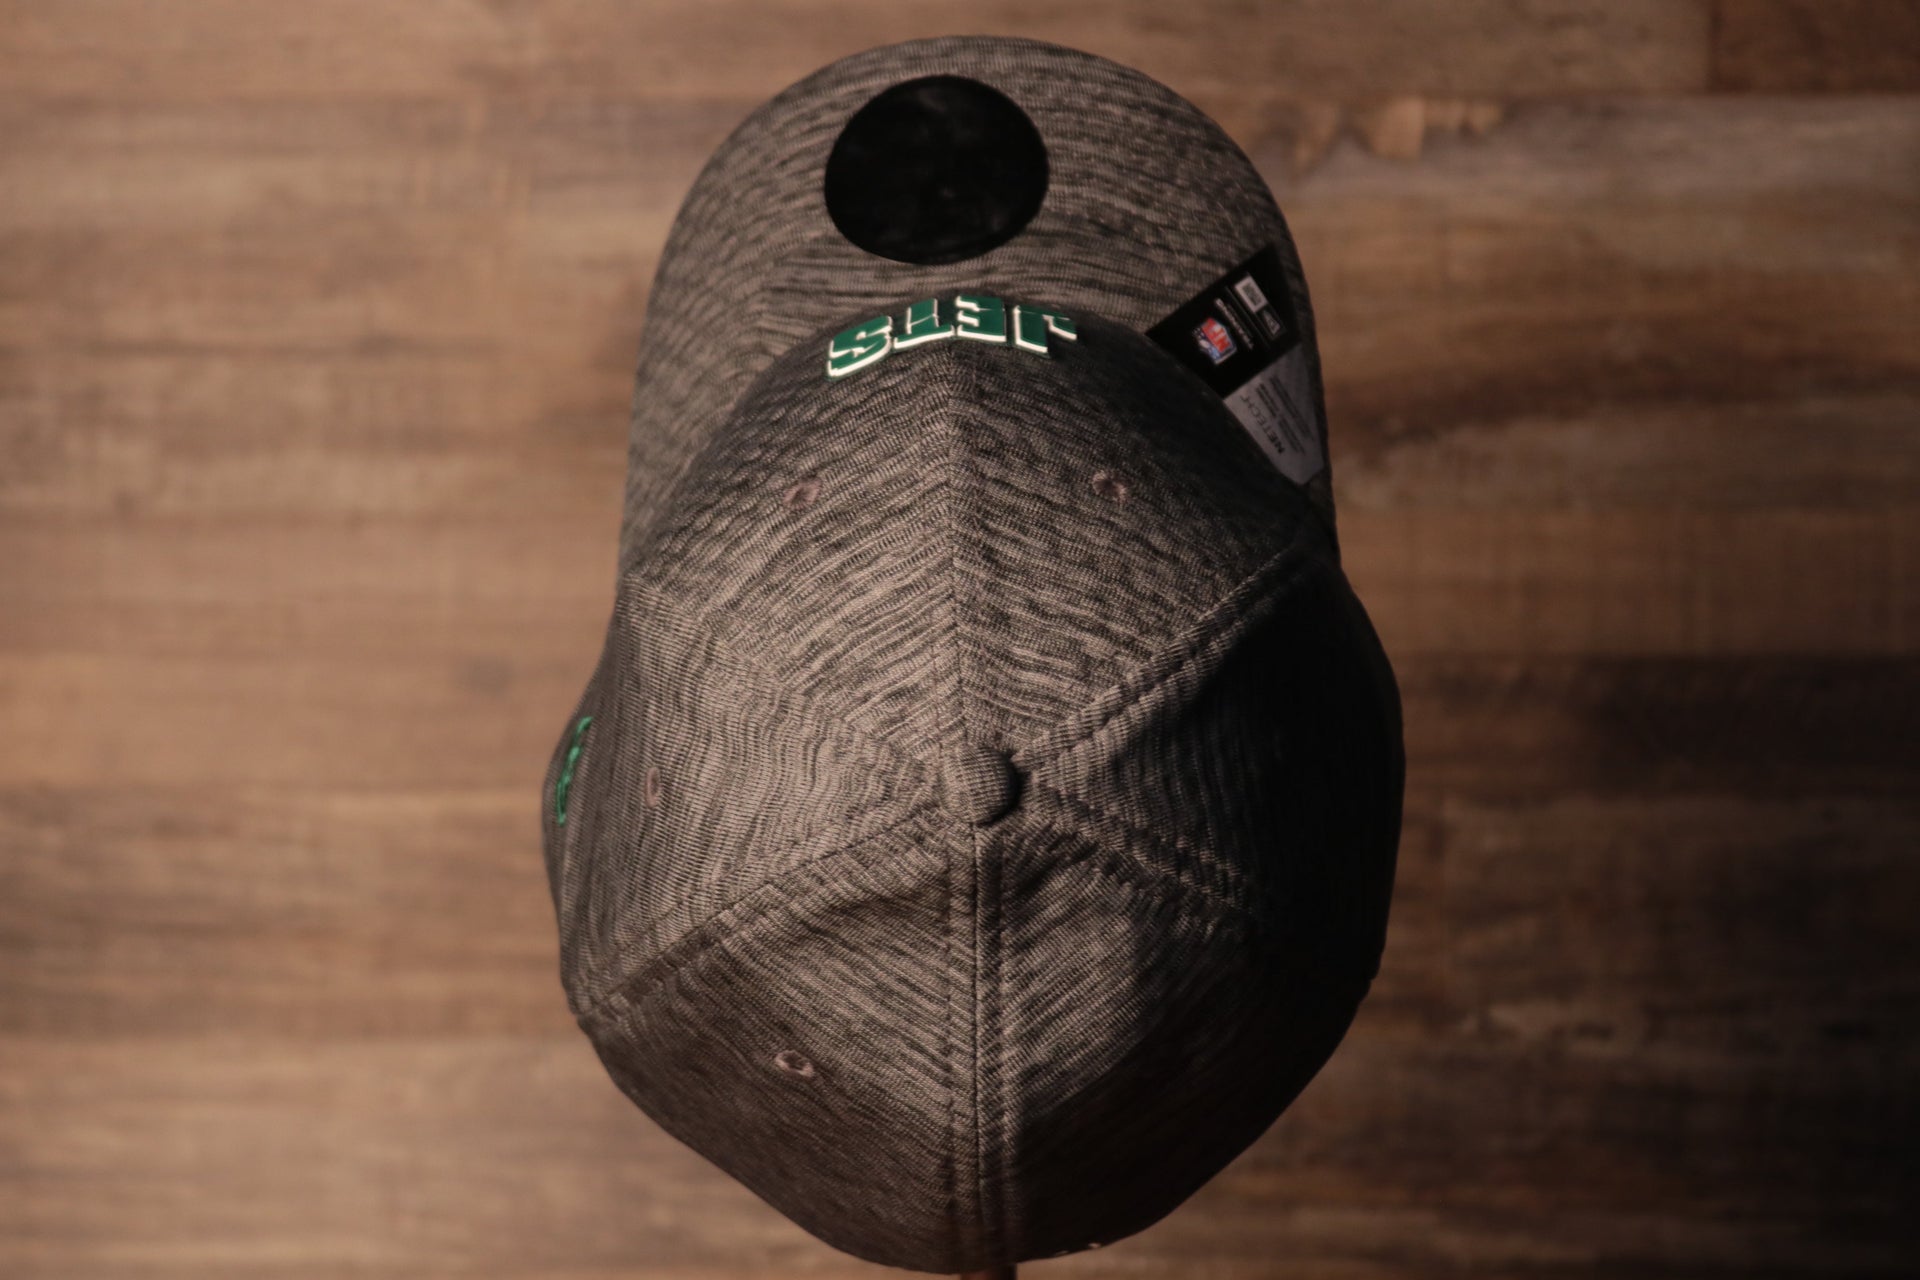 Jets 2020 Training Camp Flexfit | New York Jets 2020 On-Field Grey Training Camp Stretch Fit  the top of this jets hat is grey